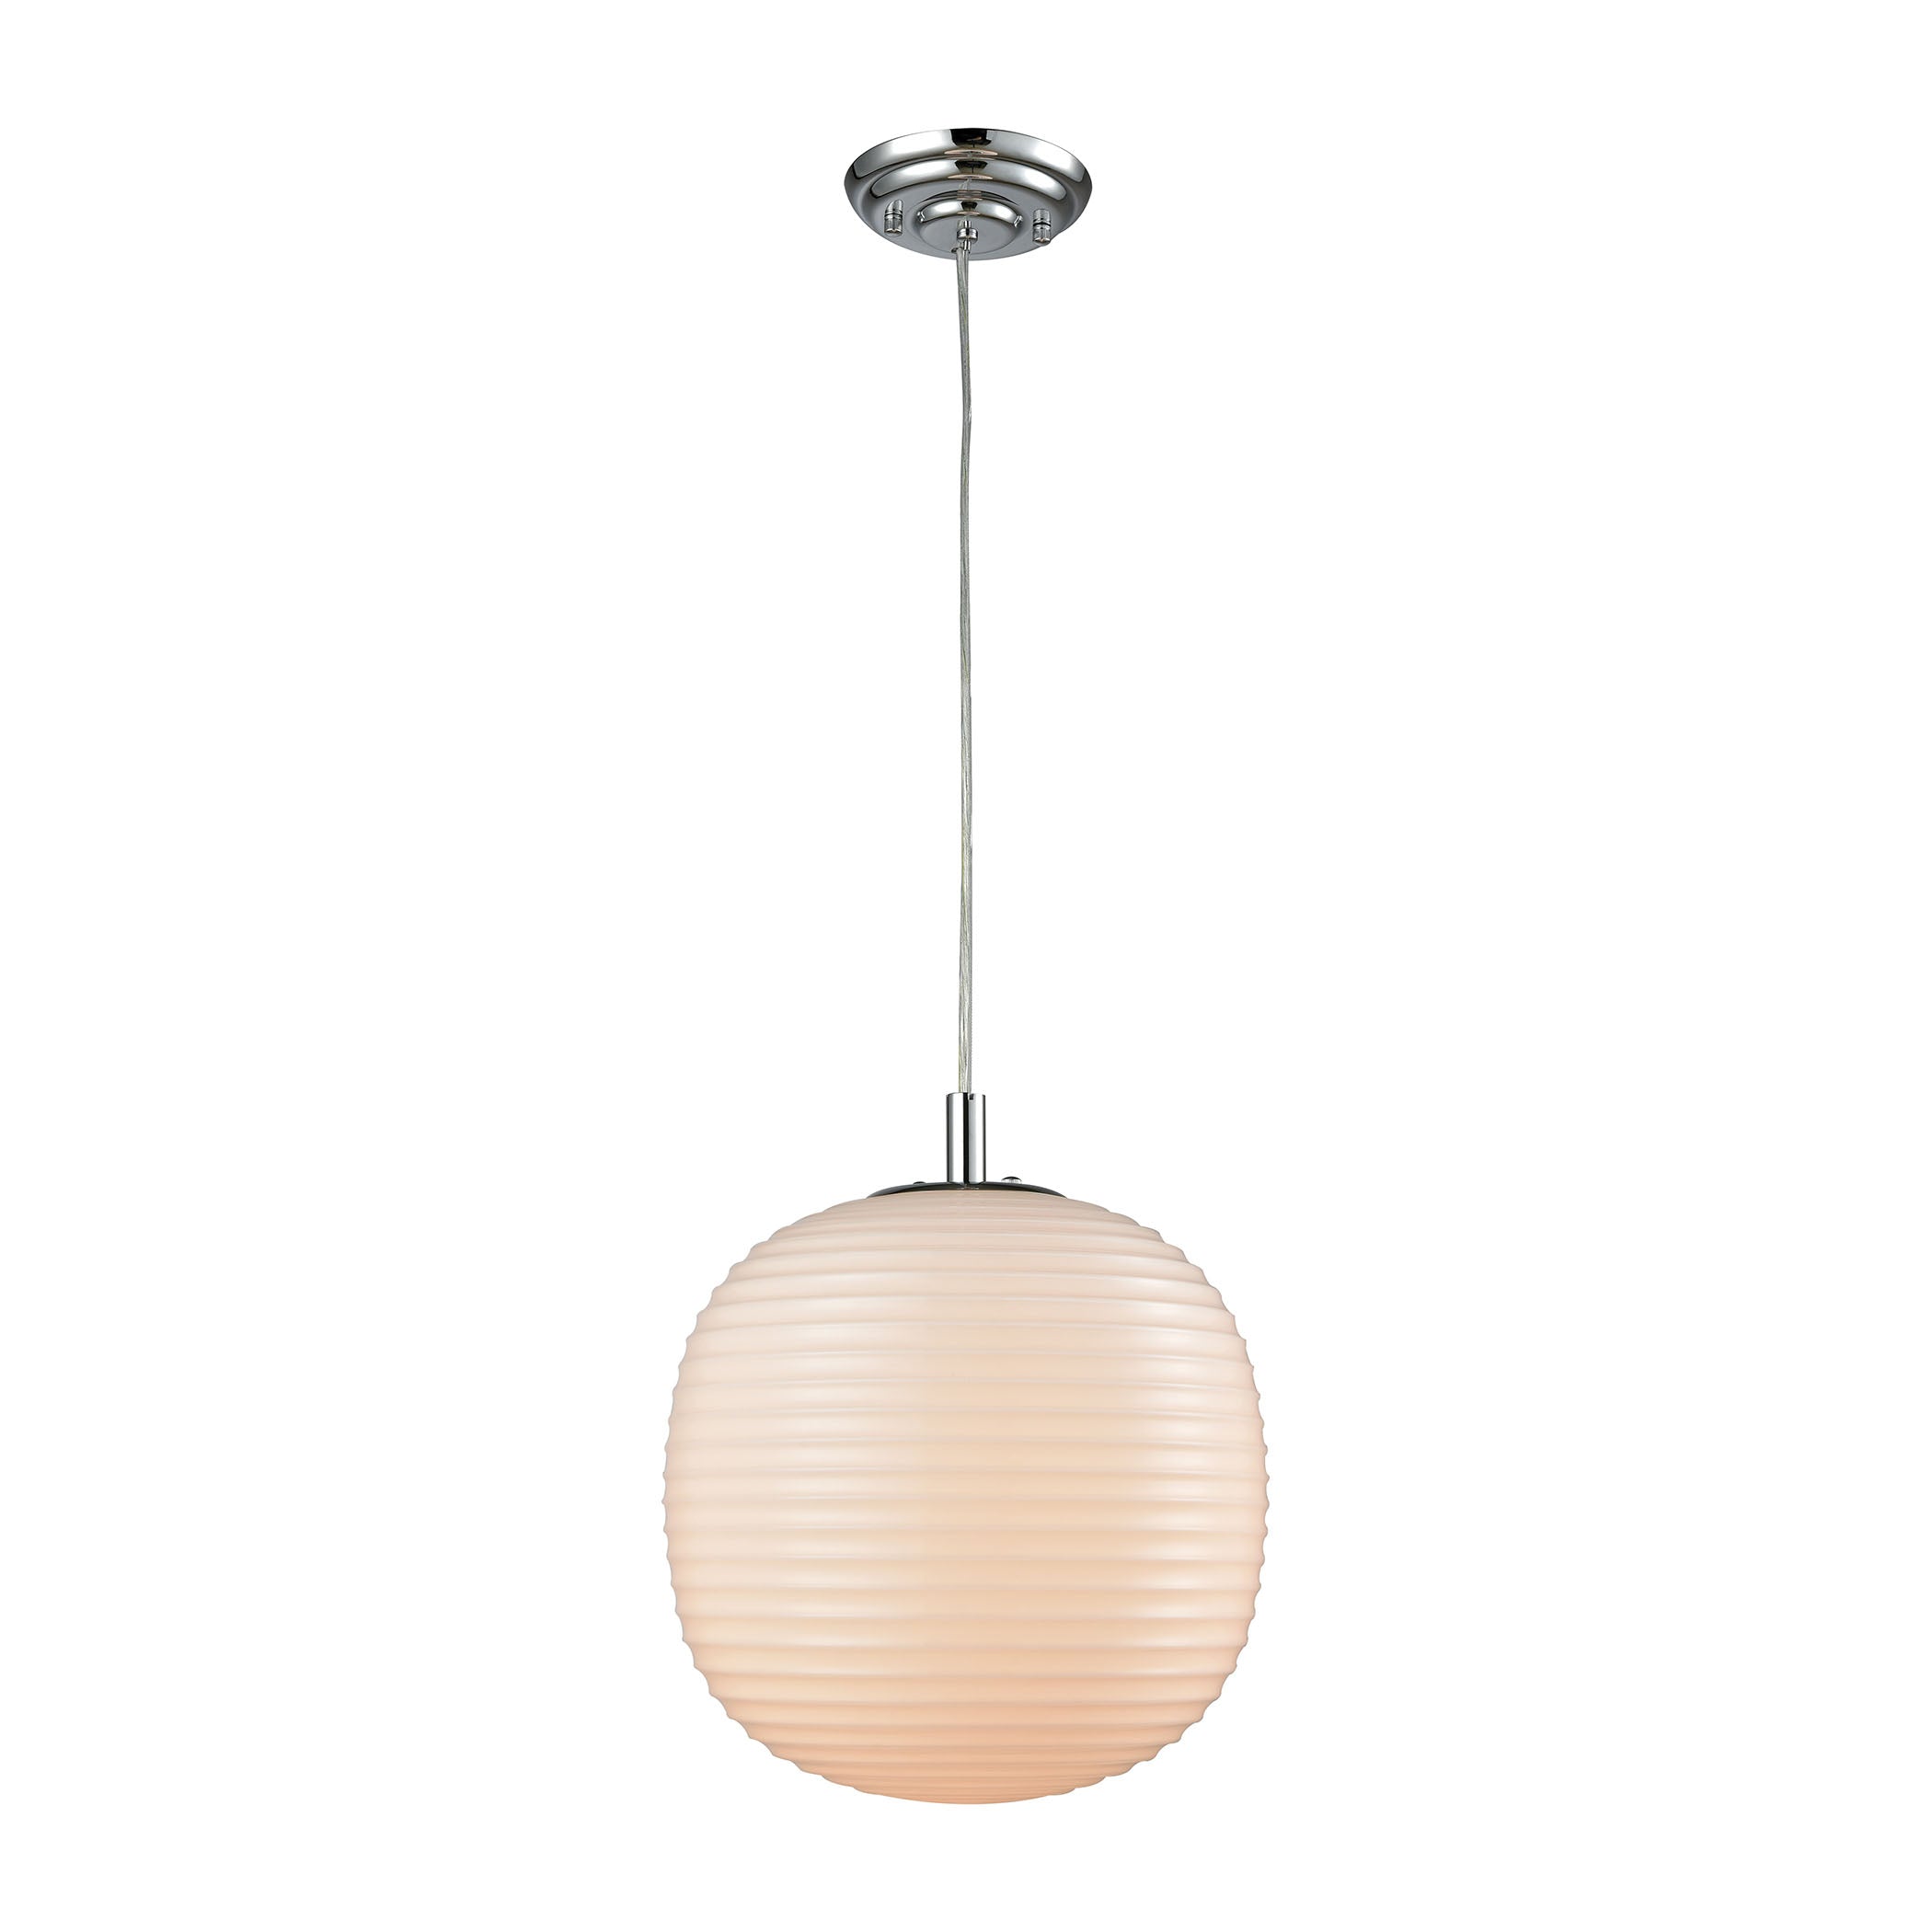 ELK Lighting 56560/1-LA Beehive 1-Light Mini Pendant in Chrome with Opal White Beehive Glass - Includes Adapter Kit